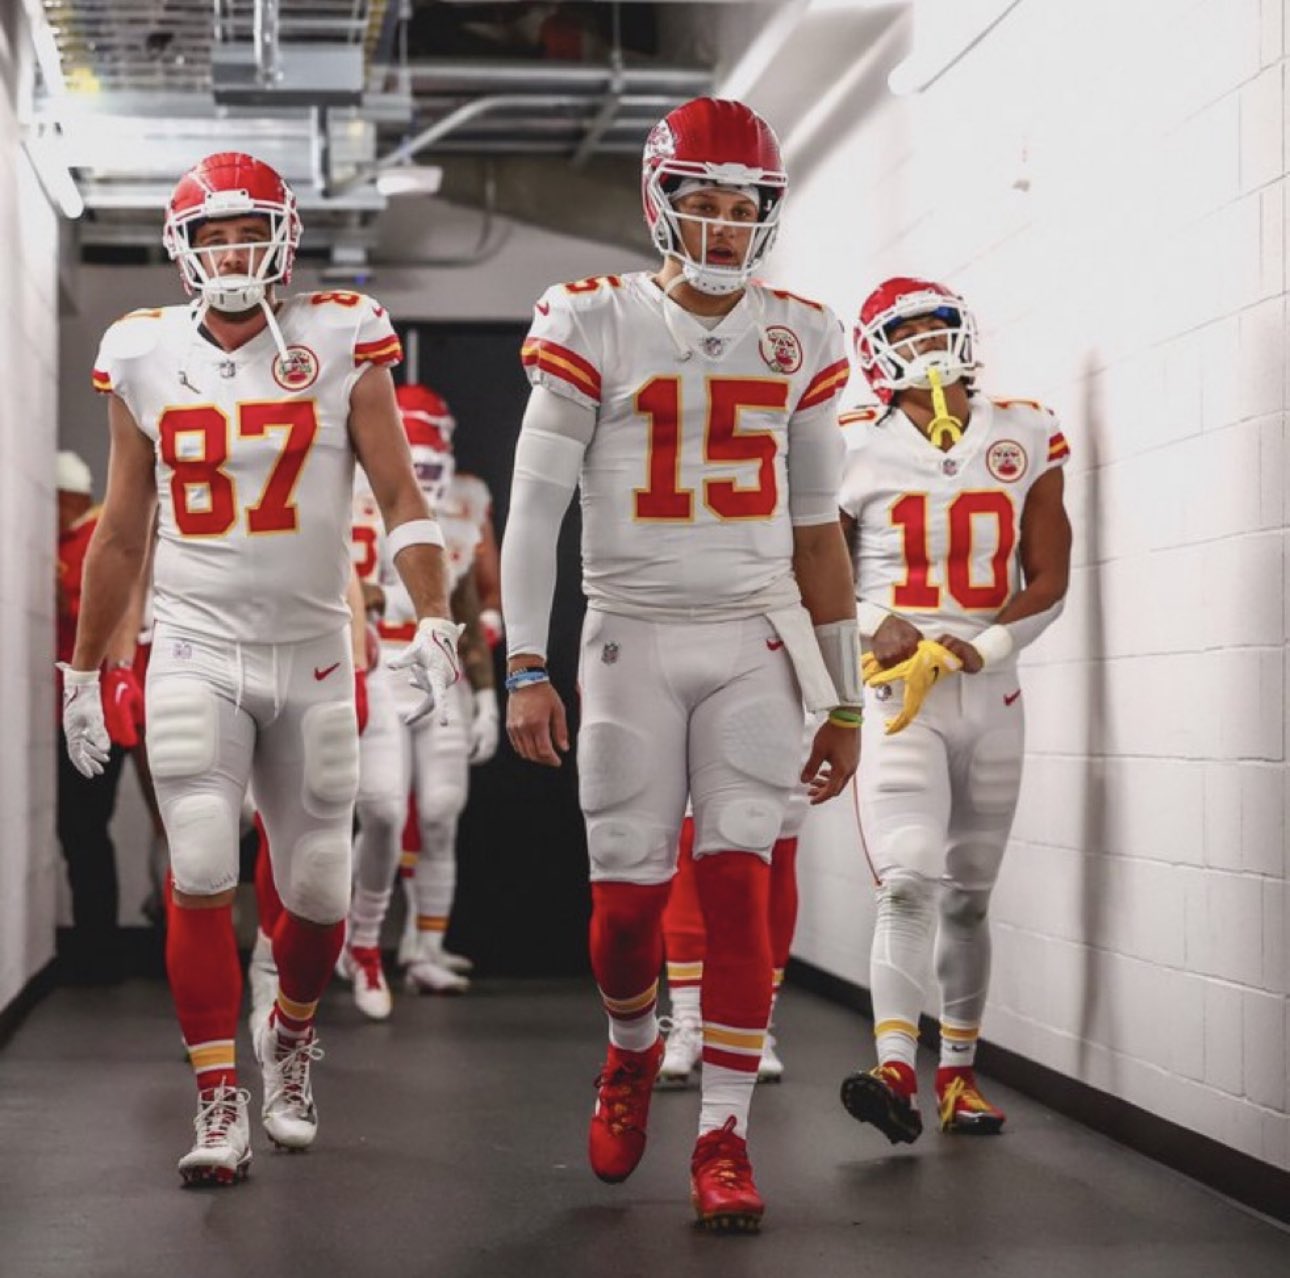 Braiden Turner on X: 'Chiefs going with the all whites for Super Bowl 57???